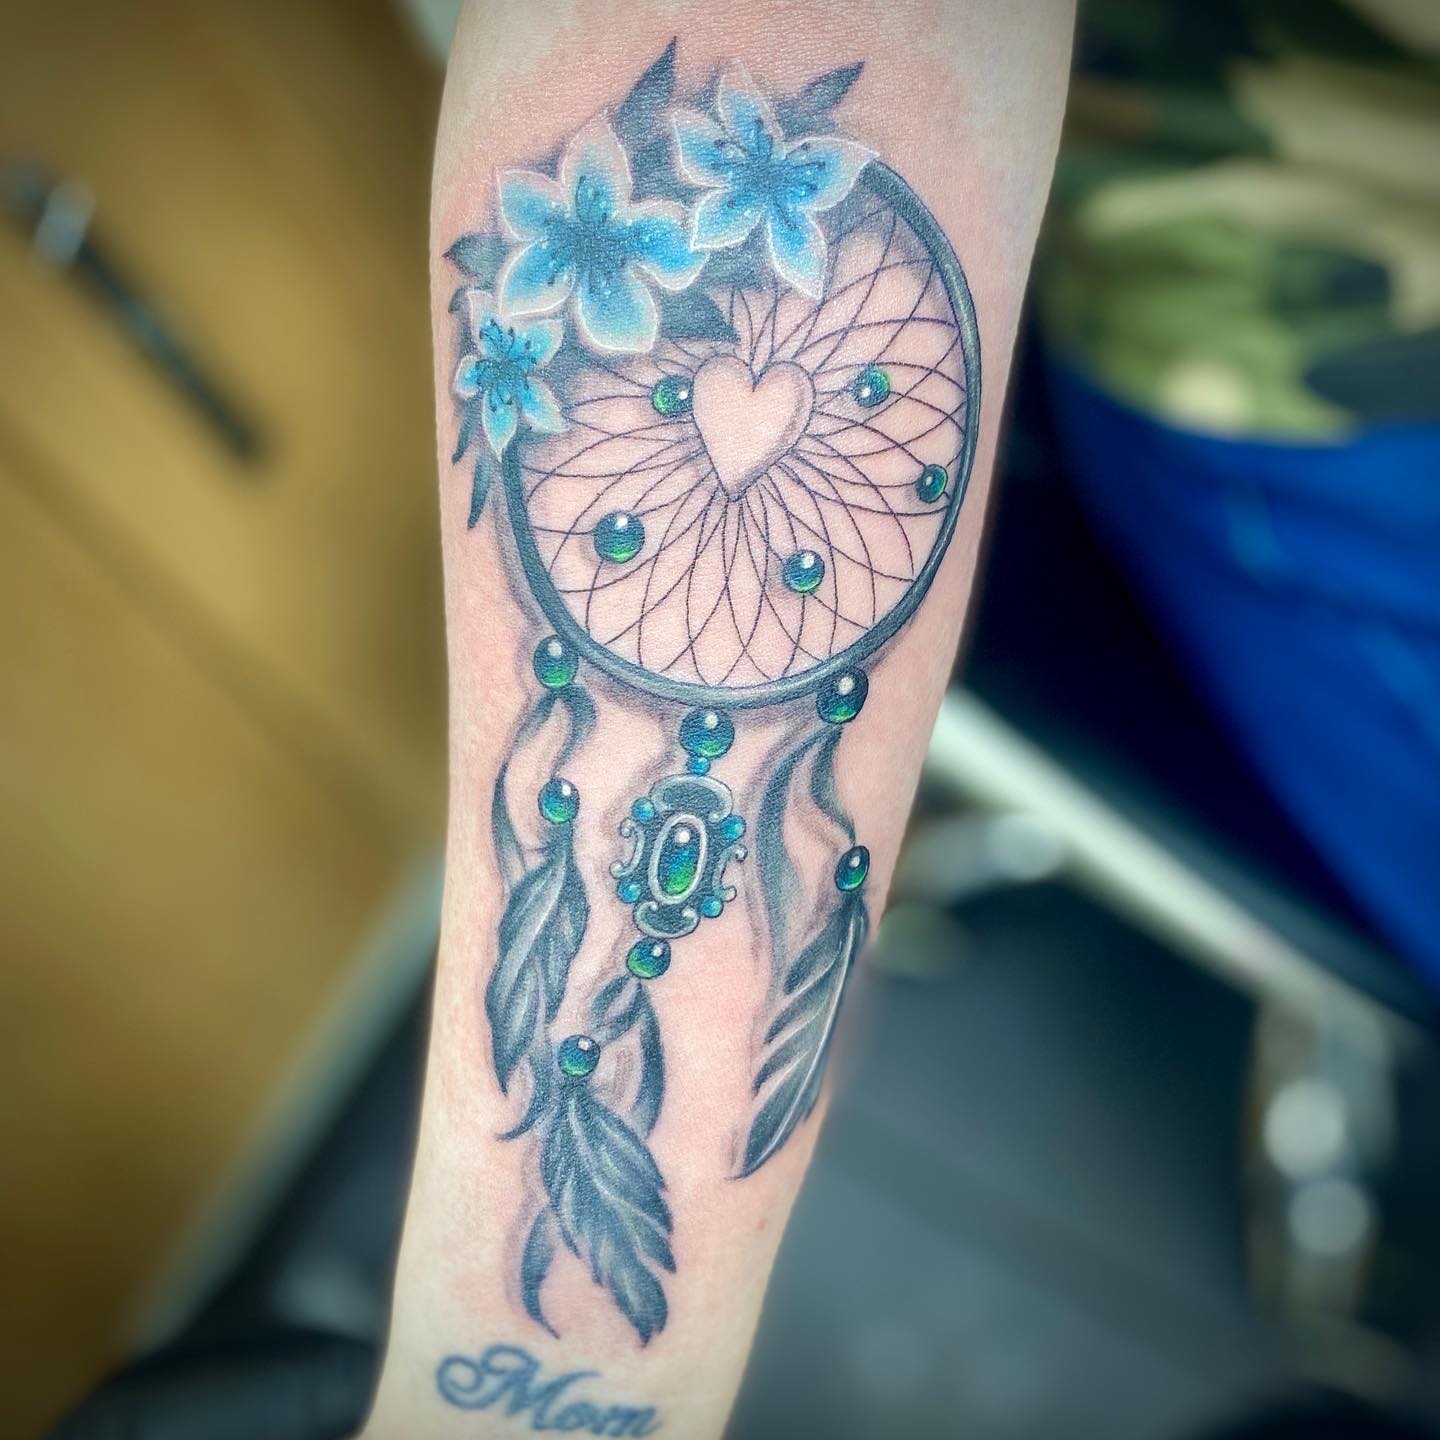 If you want to take your dream catcher tattoo to a whole different level, go for the tattoo above. Blue dreamcatcher tattoo with green stones is a tattoo for those who want to show their love of nature and their connection with the earth. The color blue represents the sky, and green is associated with trees, plants, and life. Plus, you show your love with the heart shape in the center.